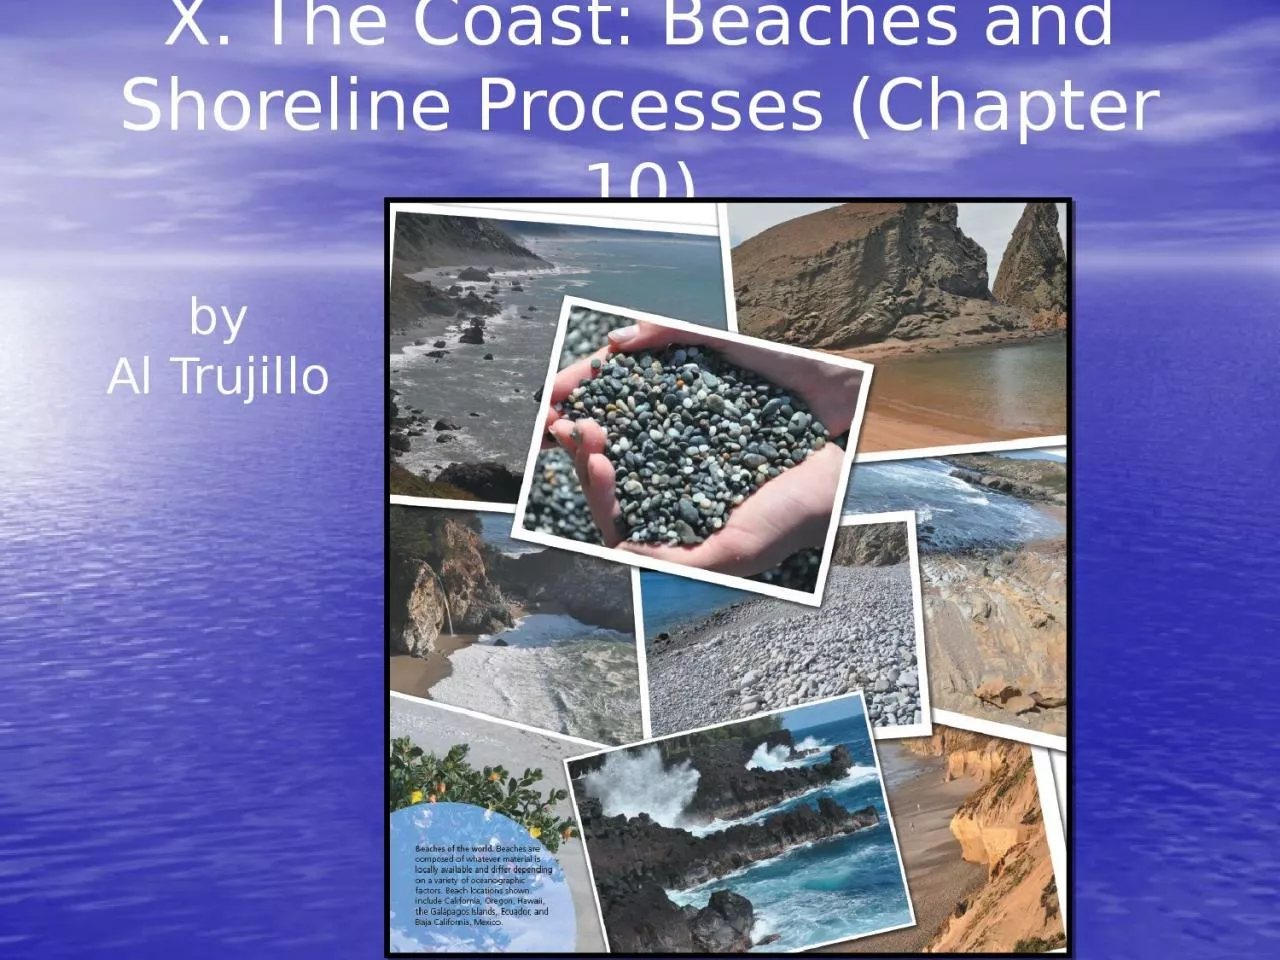 X. The Coast: Beaches and Shoreline Processes (Chapter 10)